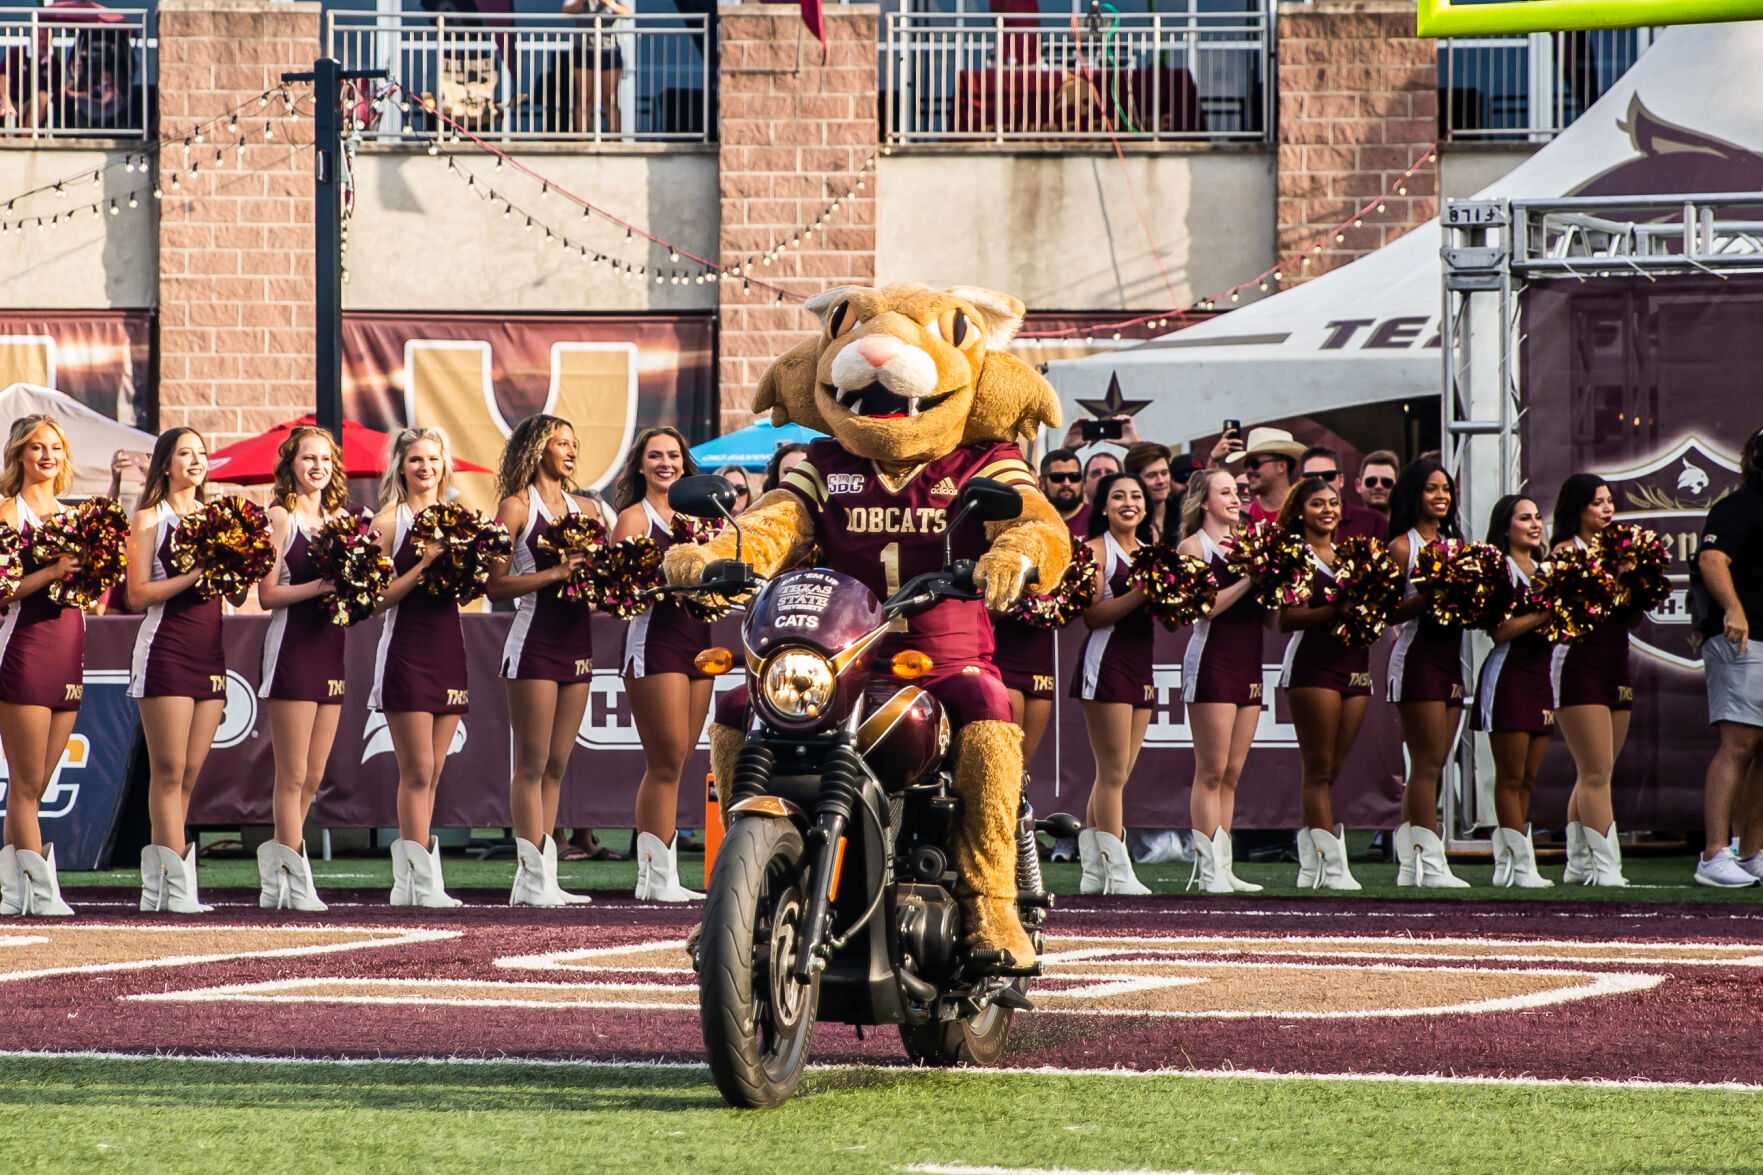 Texas State mascot, Boko, rides a motorcycle to lead the Bobcats out onto the field before the start of a football game, Saturday, Sept. 24, 2022, at Bobcat Stadium.